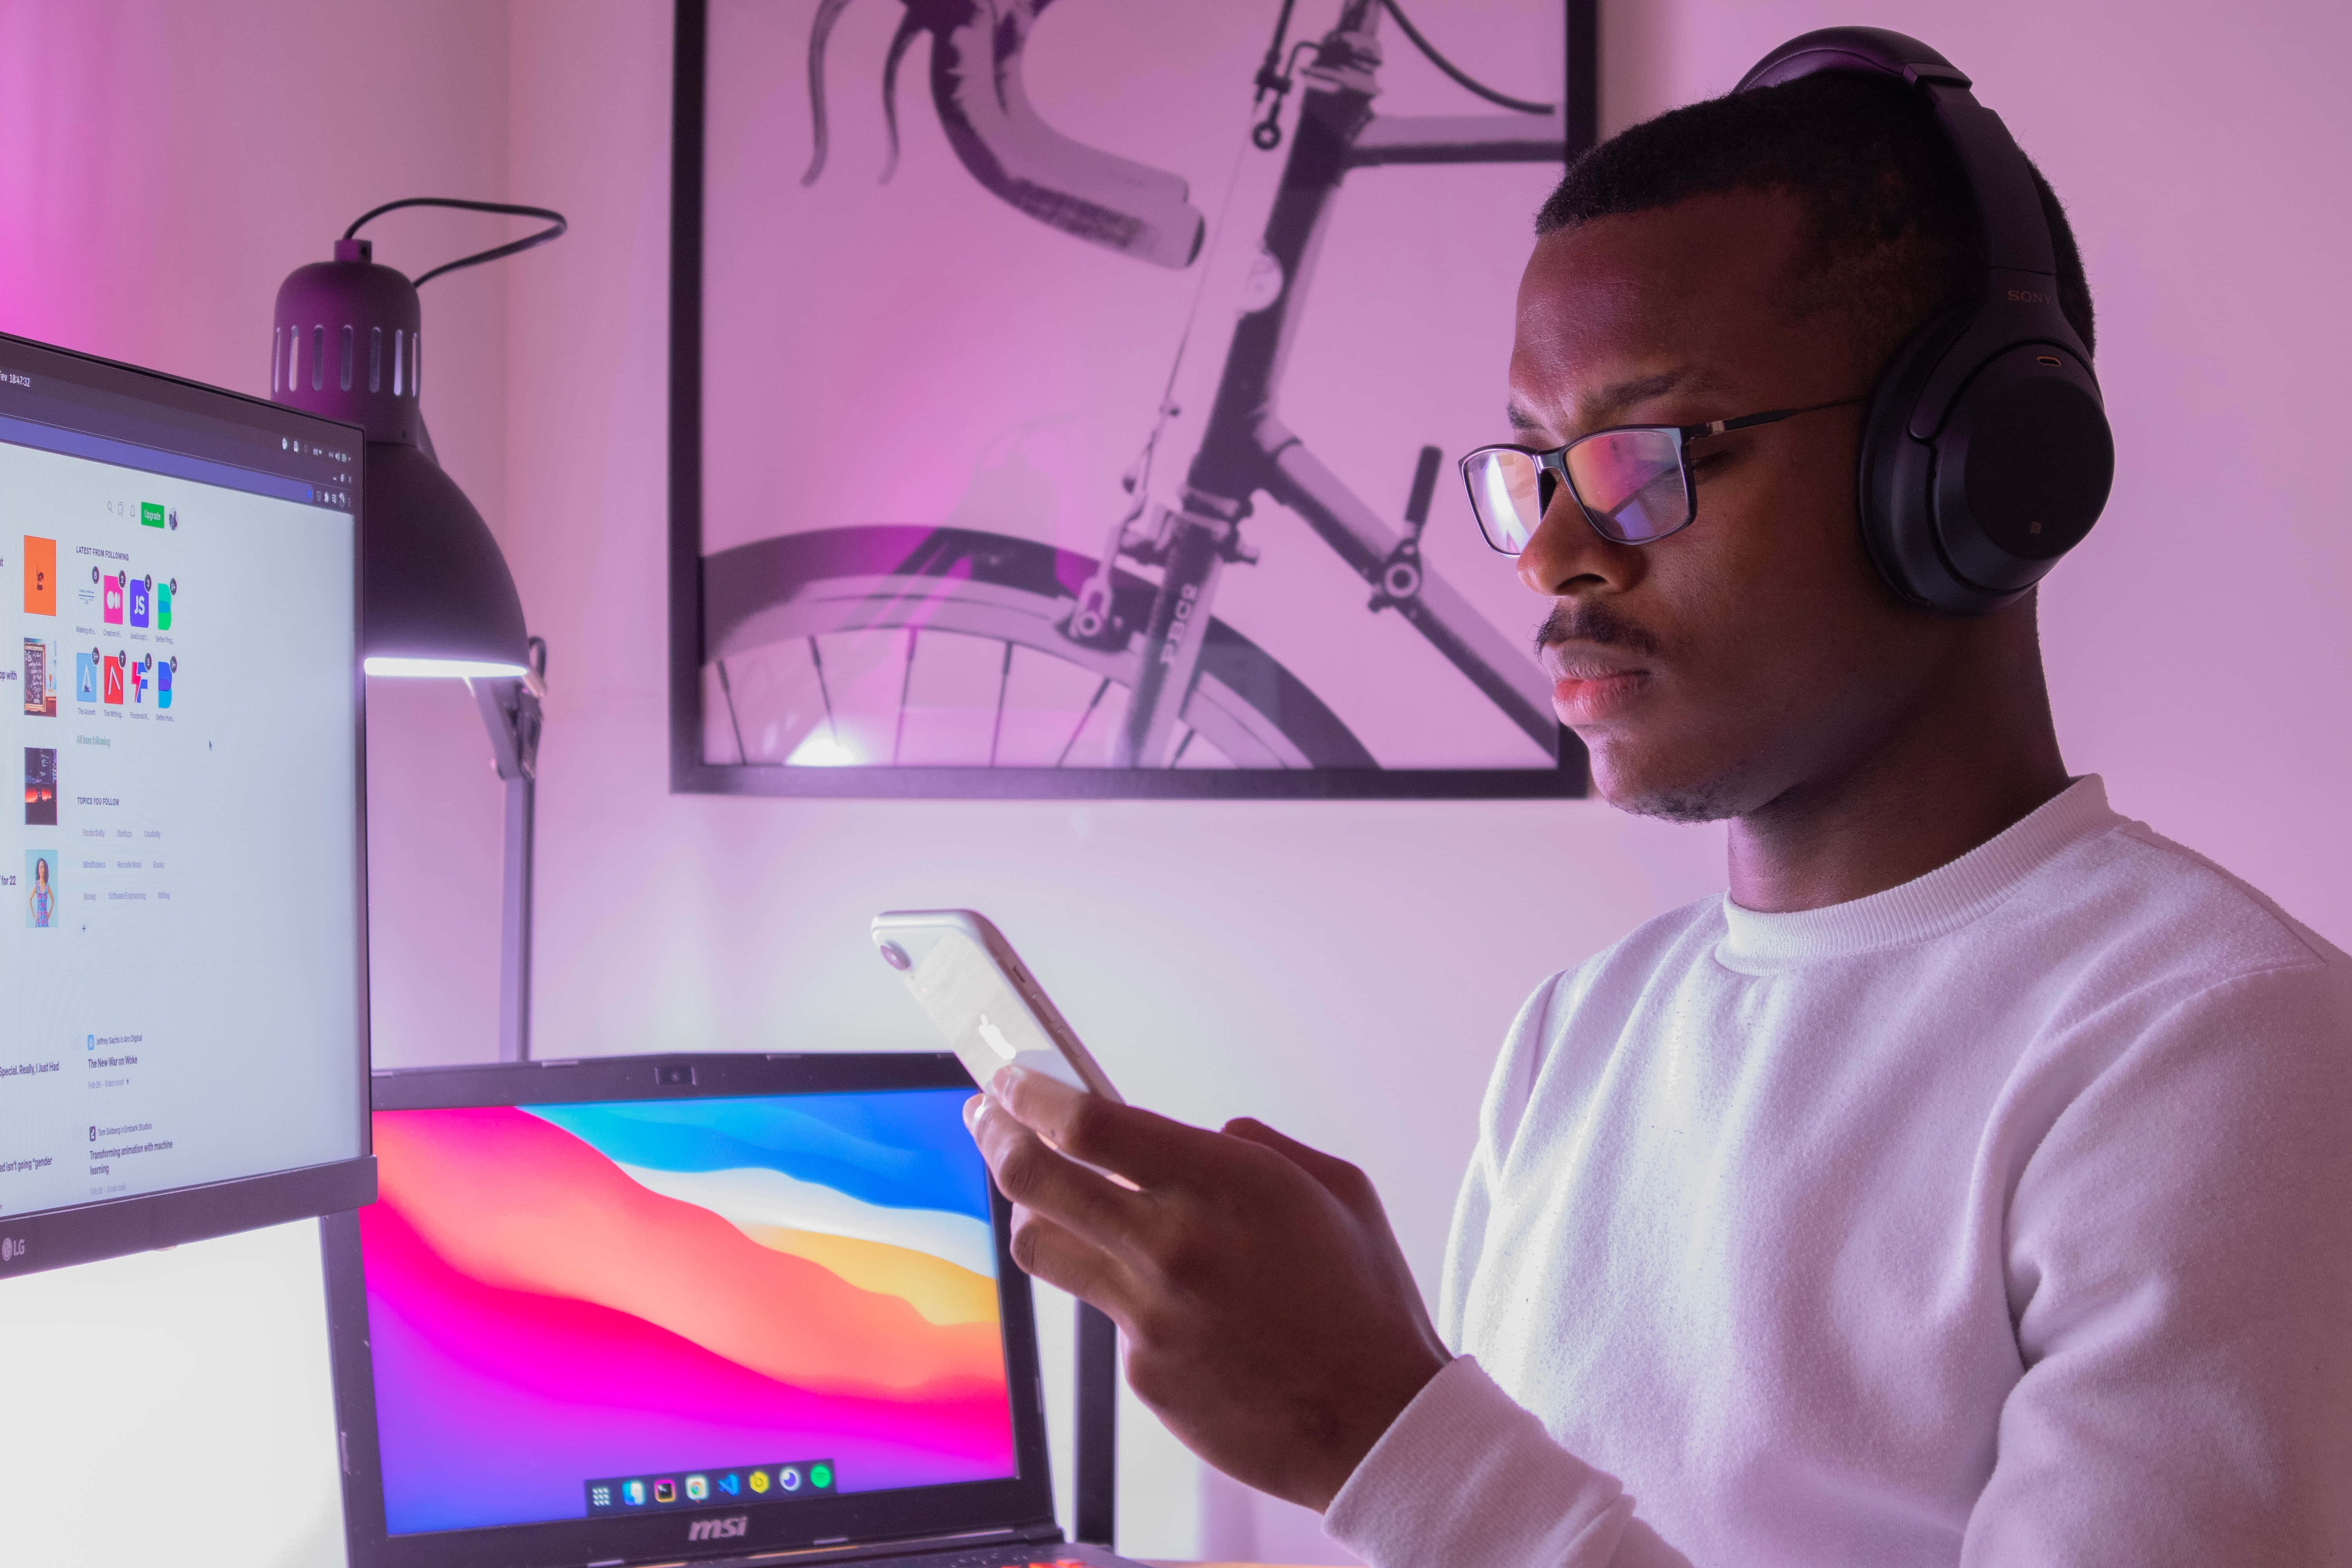 Stay connected and discover your sound with the ultimate combination of headphones and laptop. Wallpaper